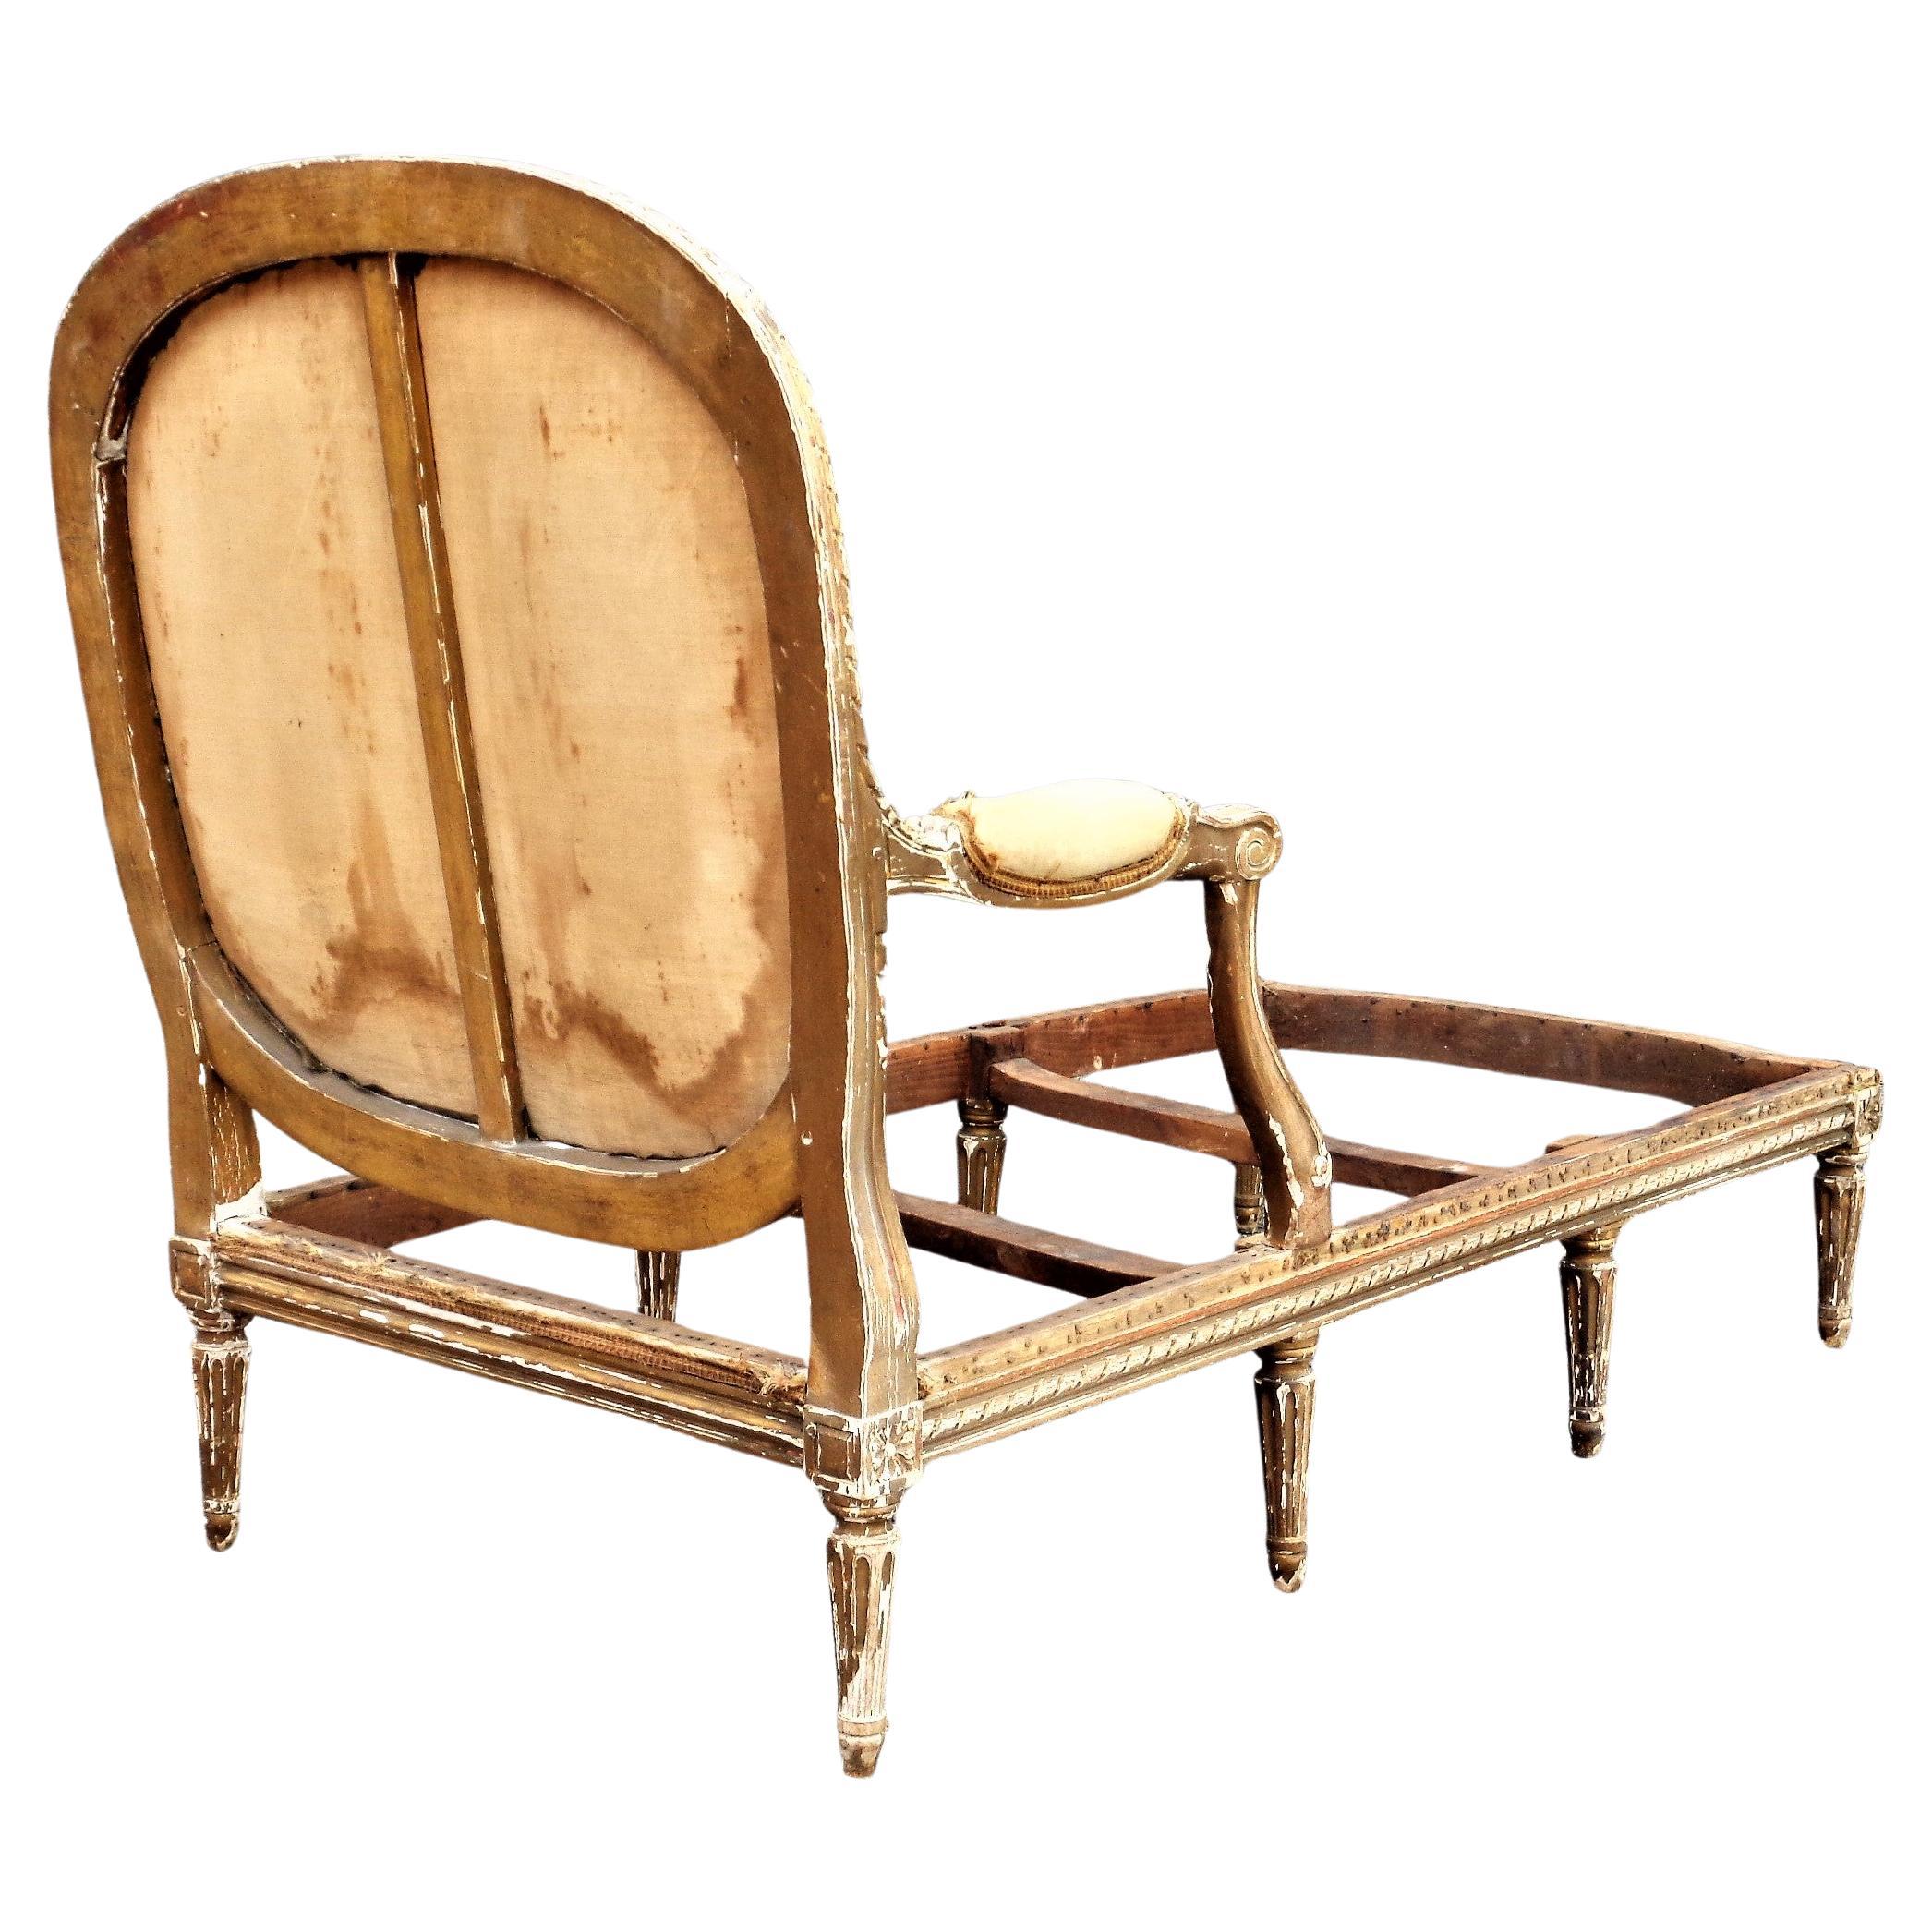 Giltwood 19th Century Louis XVI Style Chaise Lounge